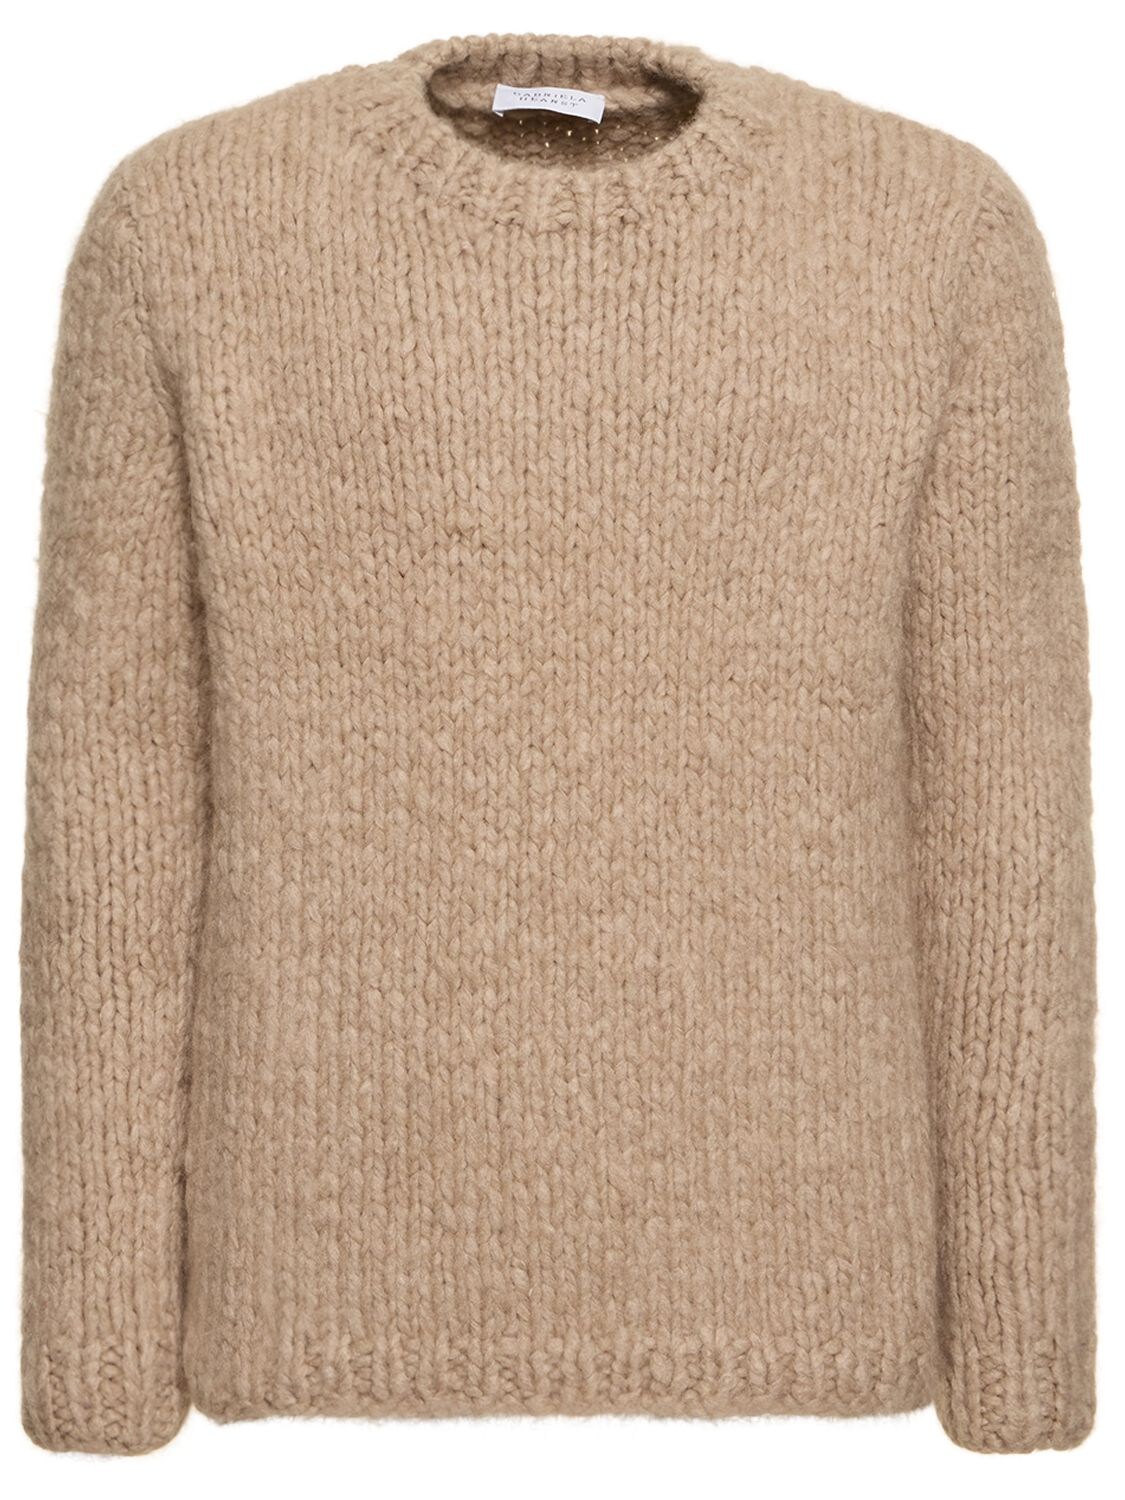 GABRIELA HEARST LAWRENCE CASHMERE SWEATER